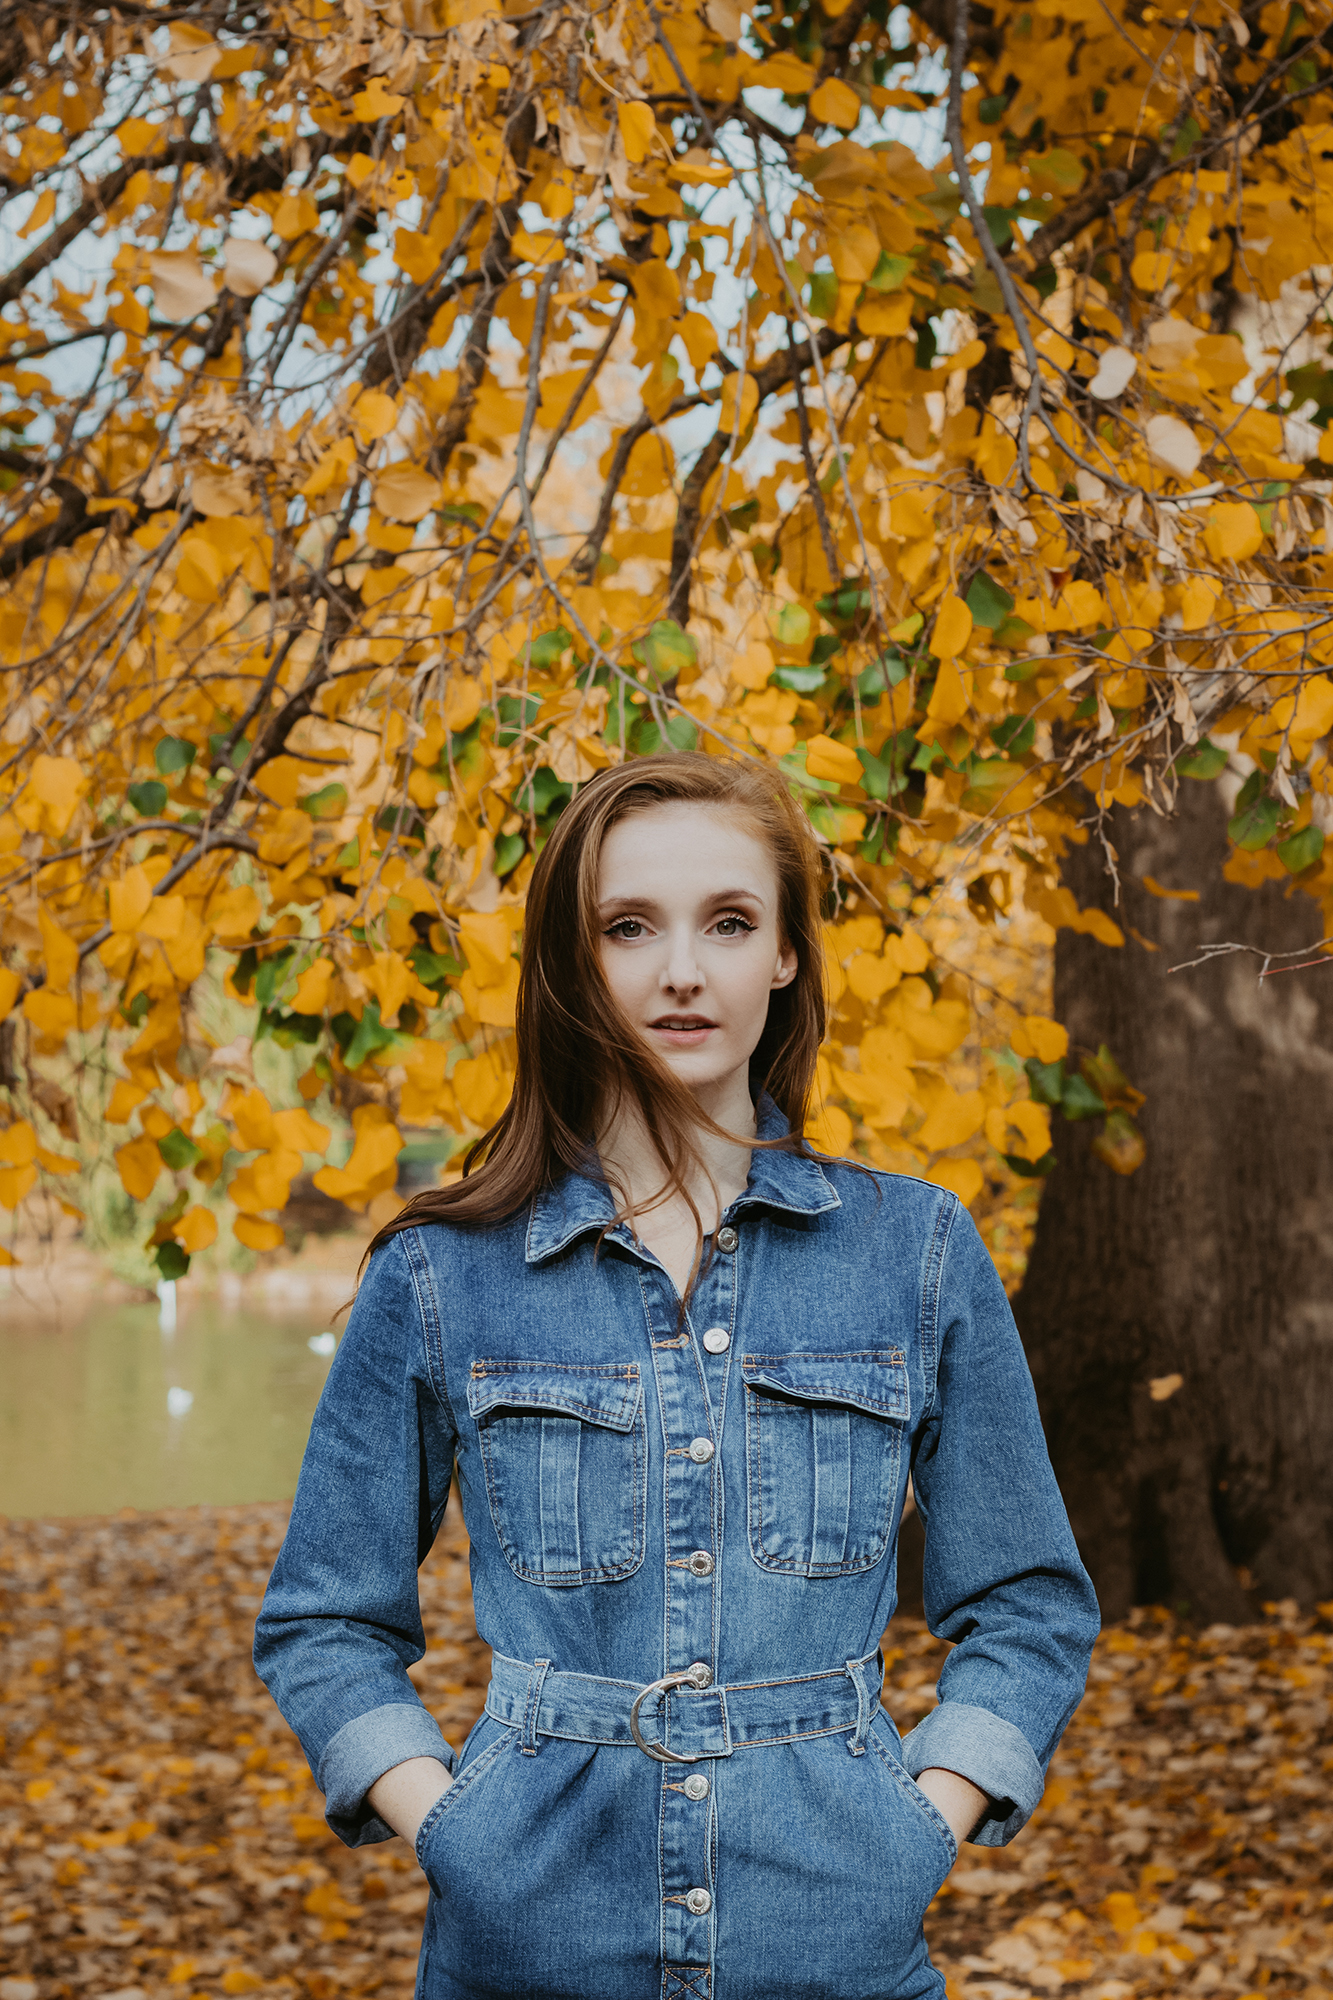 white girl with ginger long hair wearing denim in park with orange autumn leaves